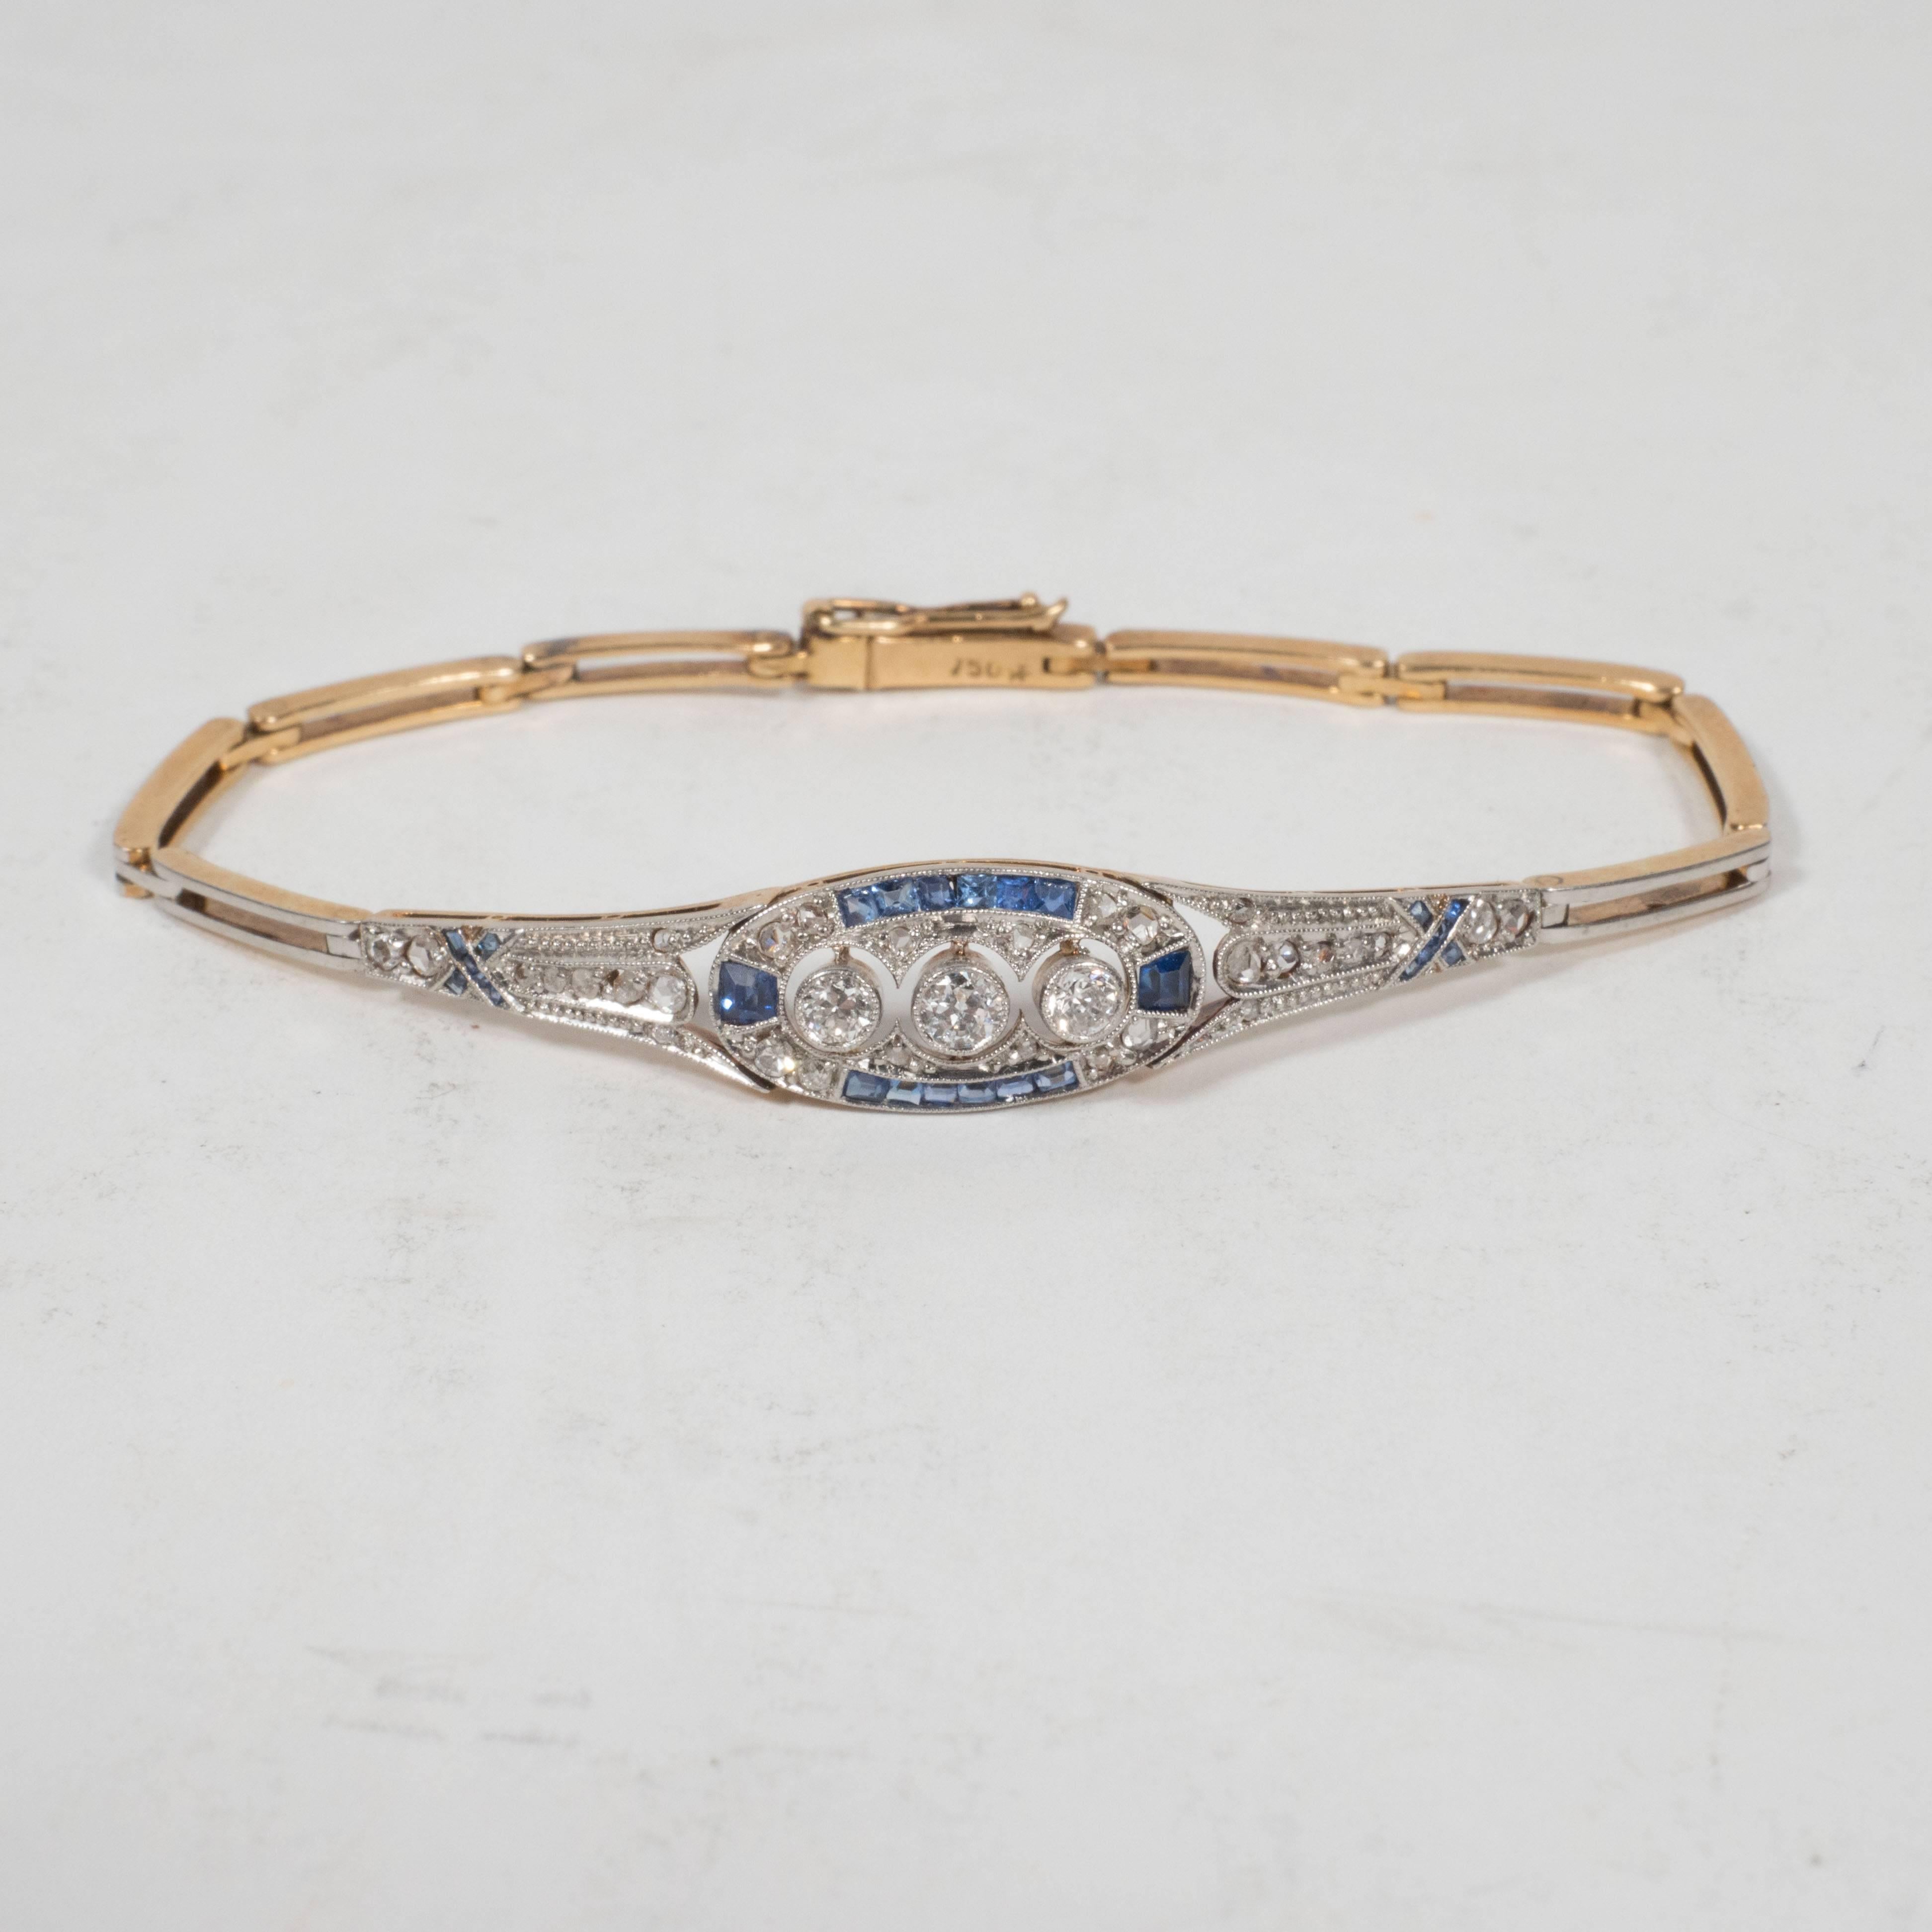 This exquisite 14k gold bracelet features fastidiously filigreed links with Baroque designs as well as foliate and floral designs throughout. The central link includes a .03 point old mine cut diamond flanked on either side by two square sapphires,